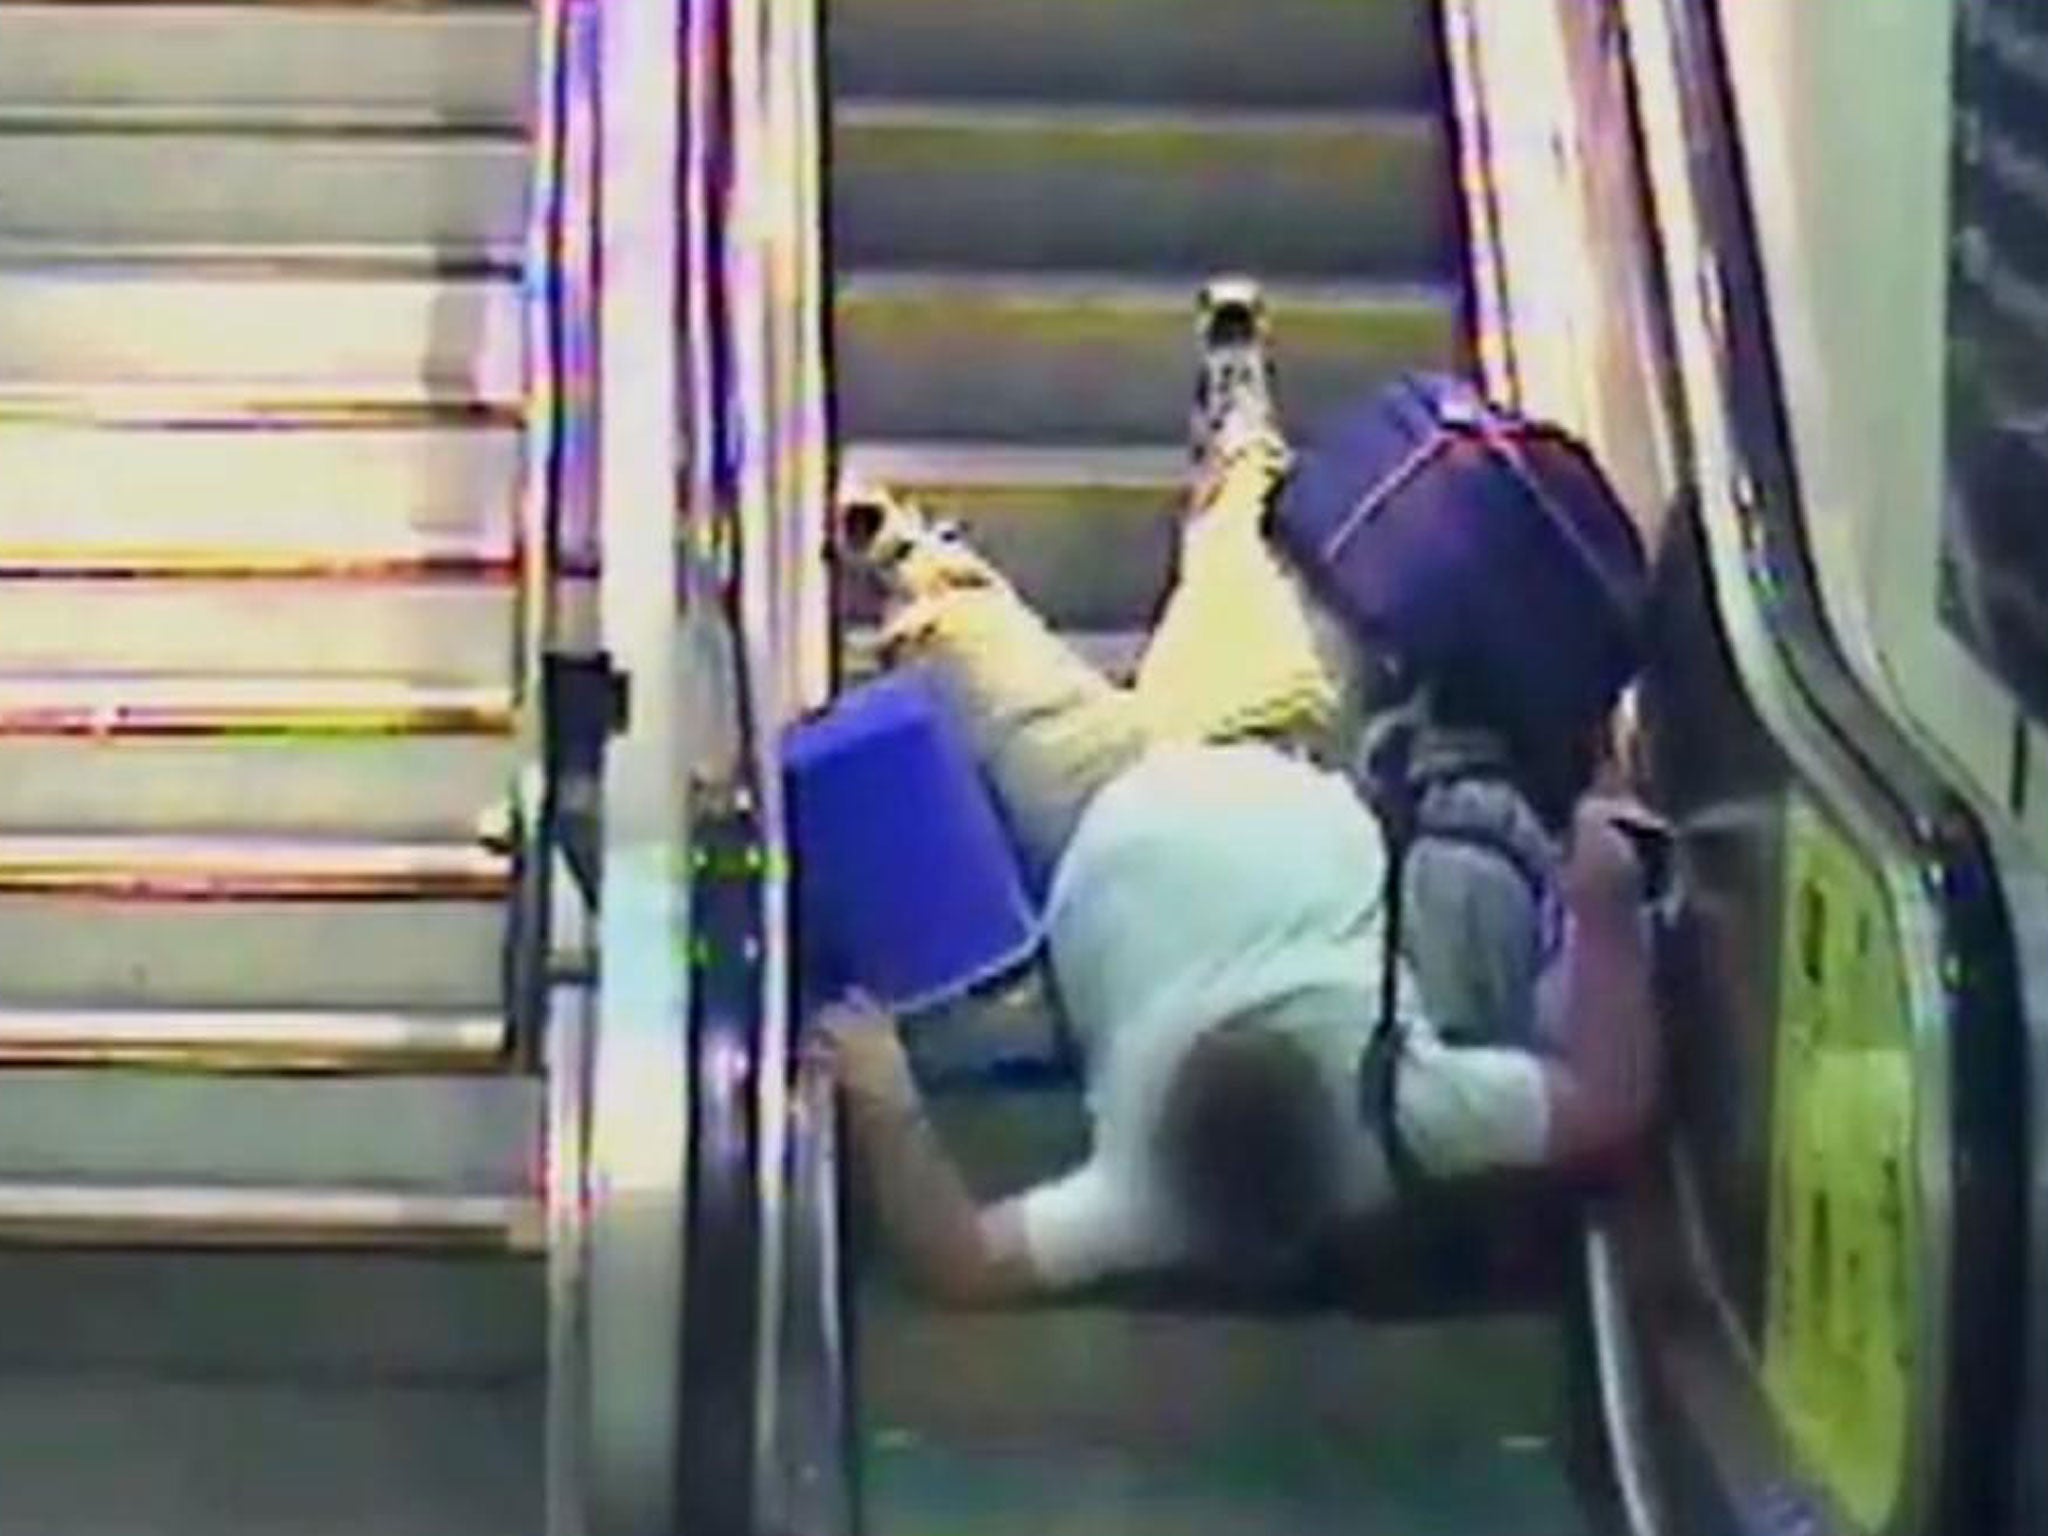 This unfortunate traveller was dragged up the escalators along with all of their luggage